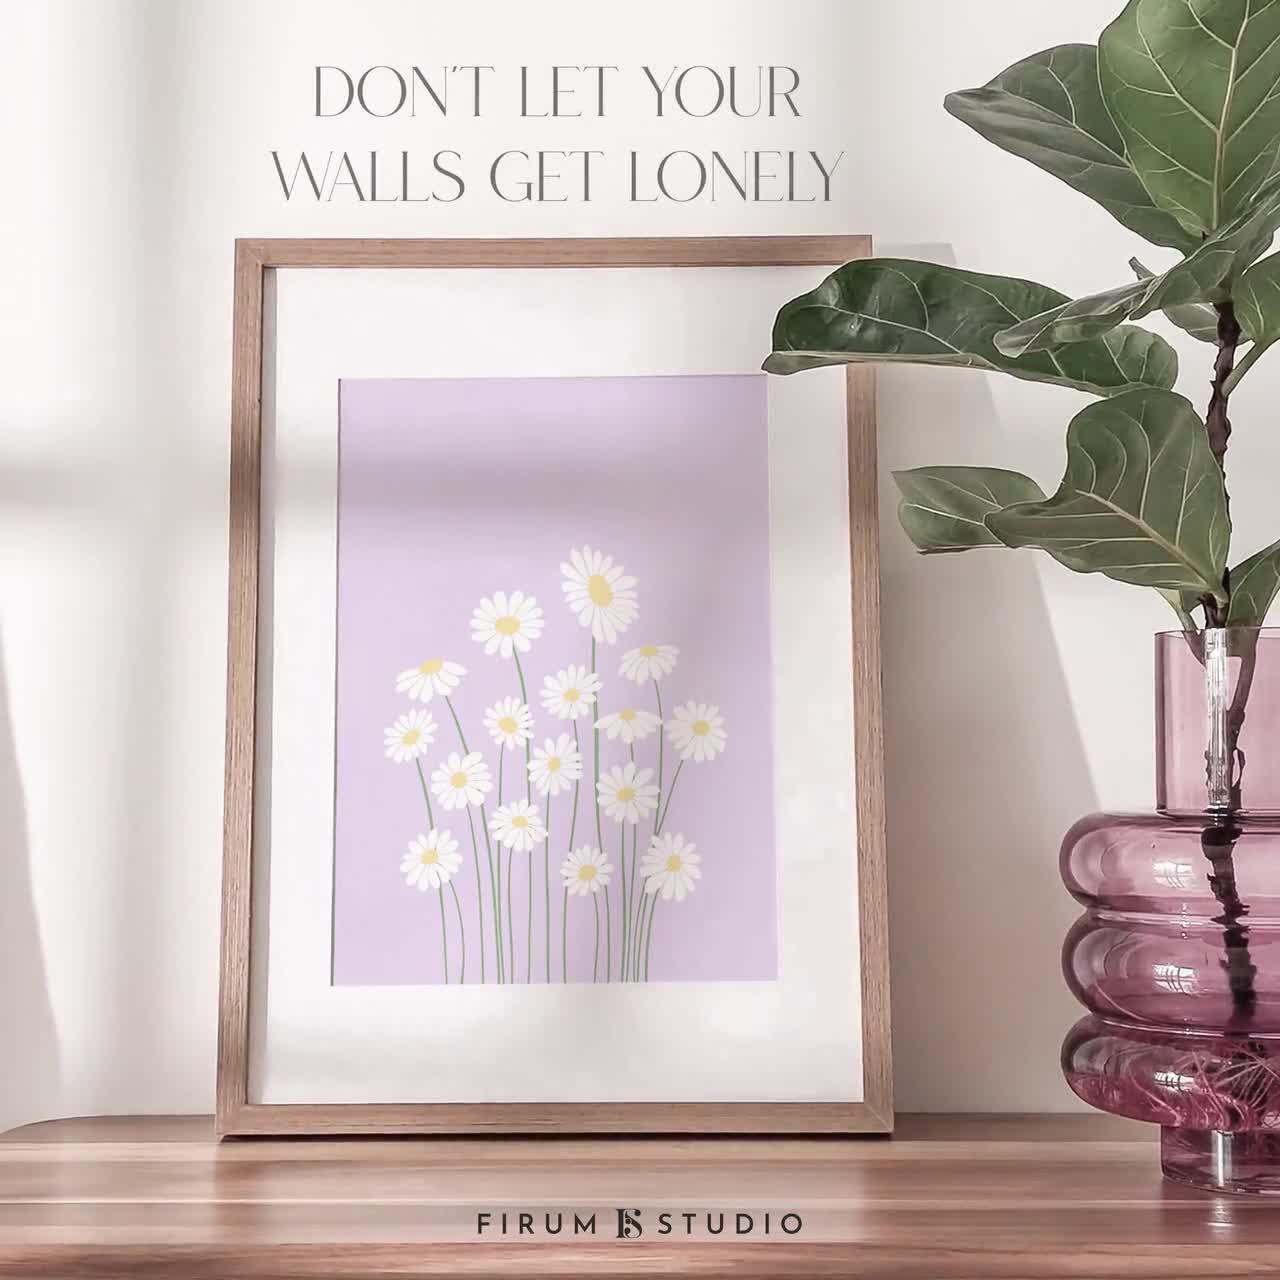  Govivo But Did You Die? - Wall Decor Art Print with a lilac  background - 8x10 unframed artwork printed on photograph paper: Posters &  Prints